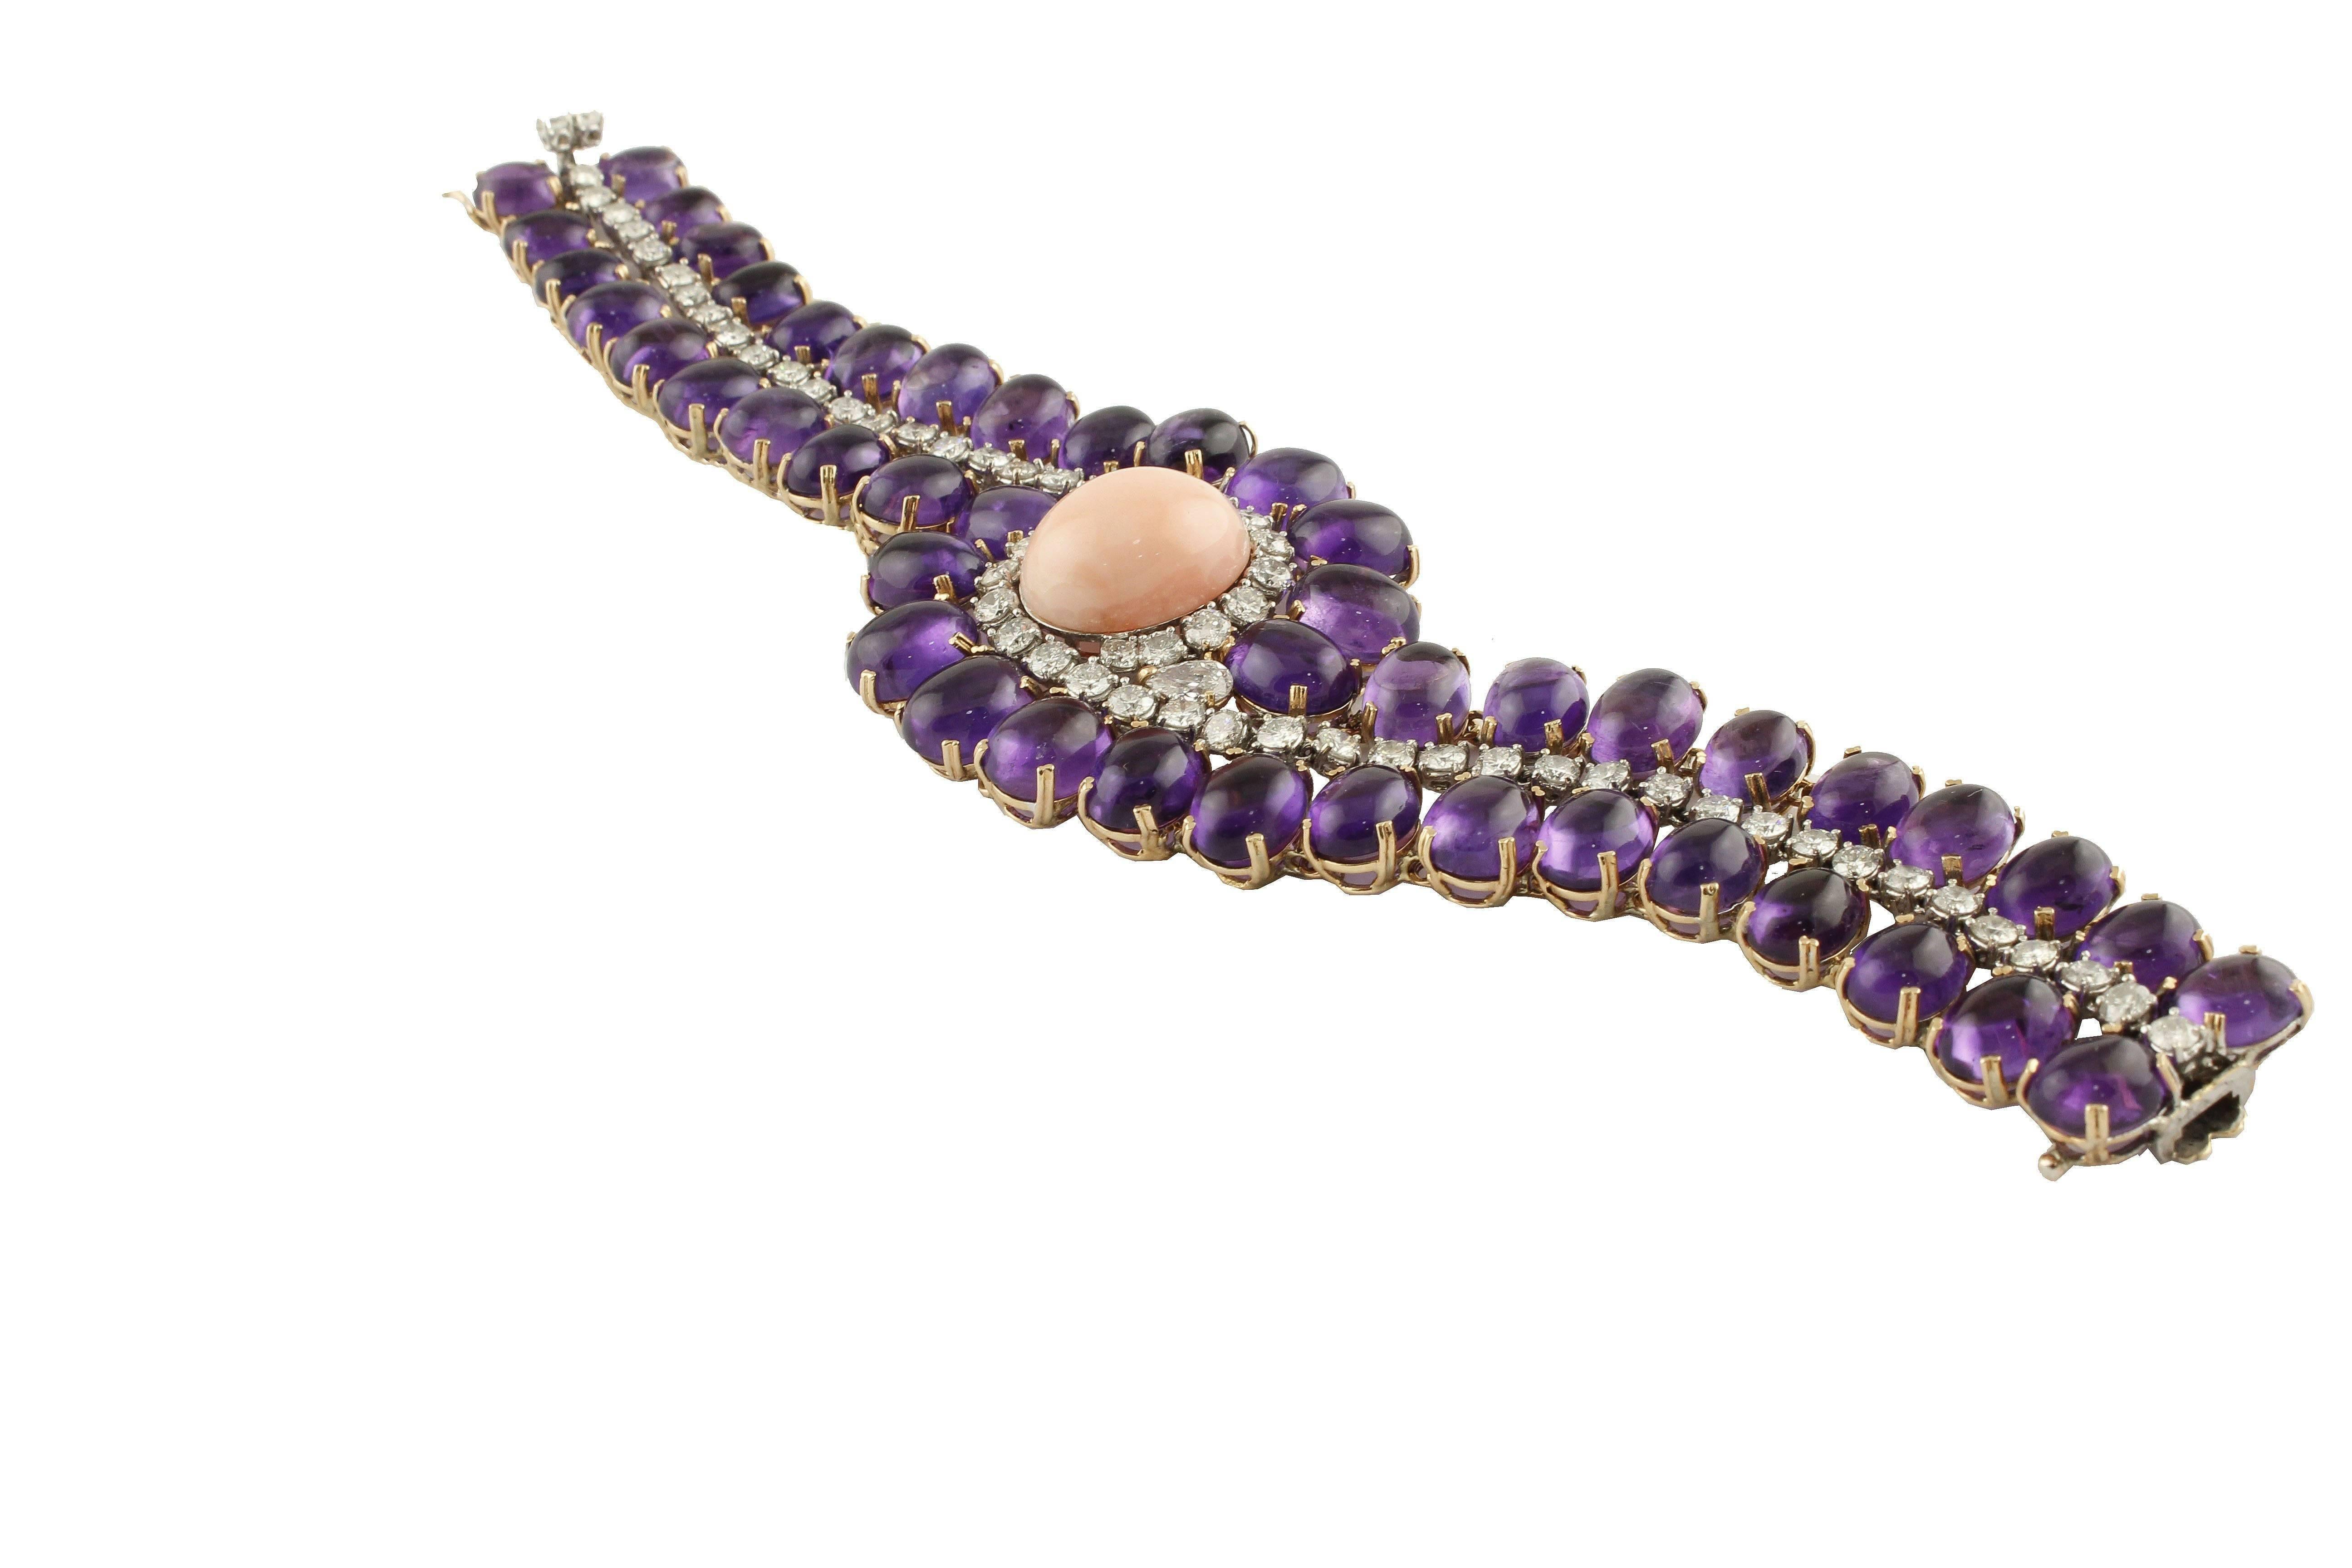 Brilliant Cut Amethysts, Diamonds, Oval Shape Pink Coral, Rose and White Gold Bracelet For Sale